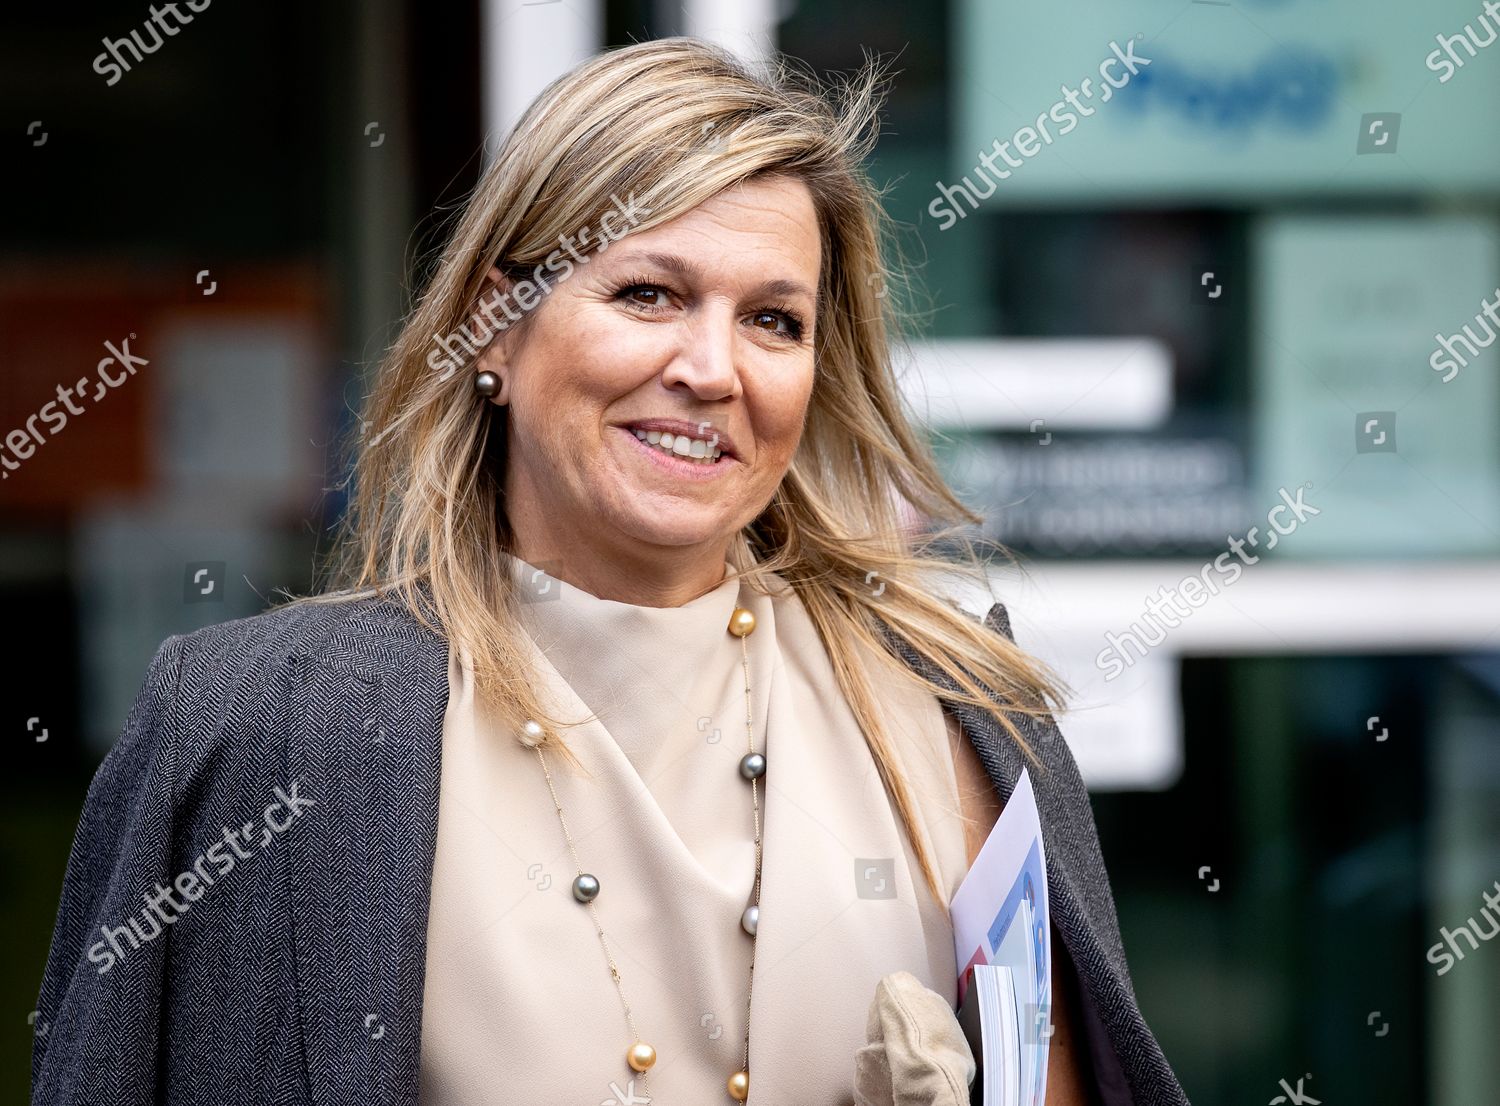 queen-maxima-visit-to-the-parnassia-group-the-hague-the-netherlands-shutterstock-editorial-10675389z.jpg